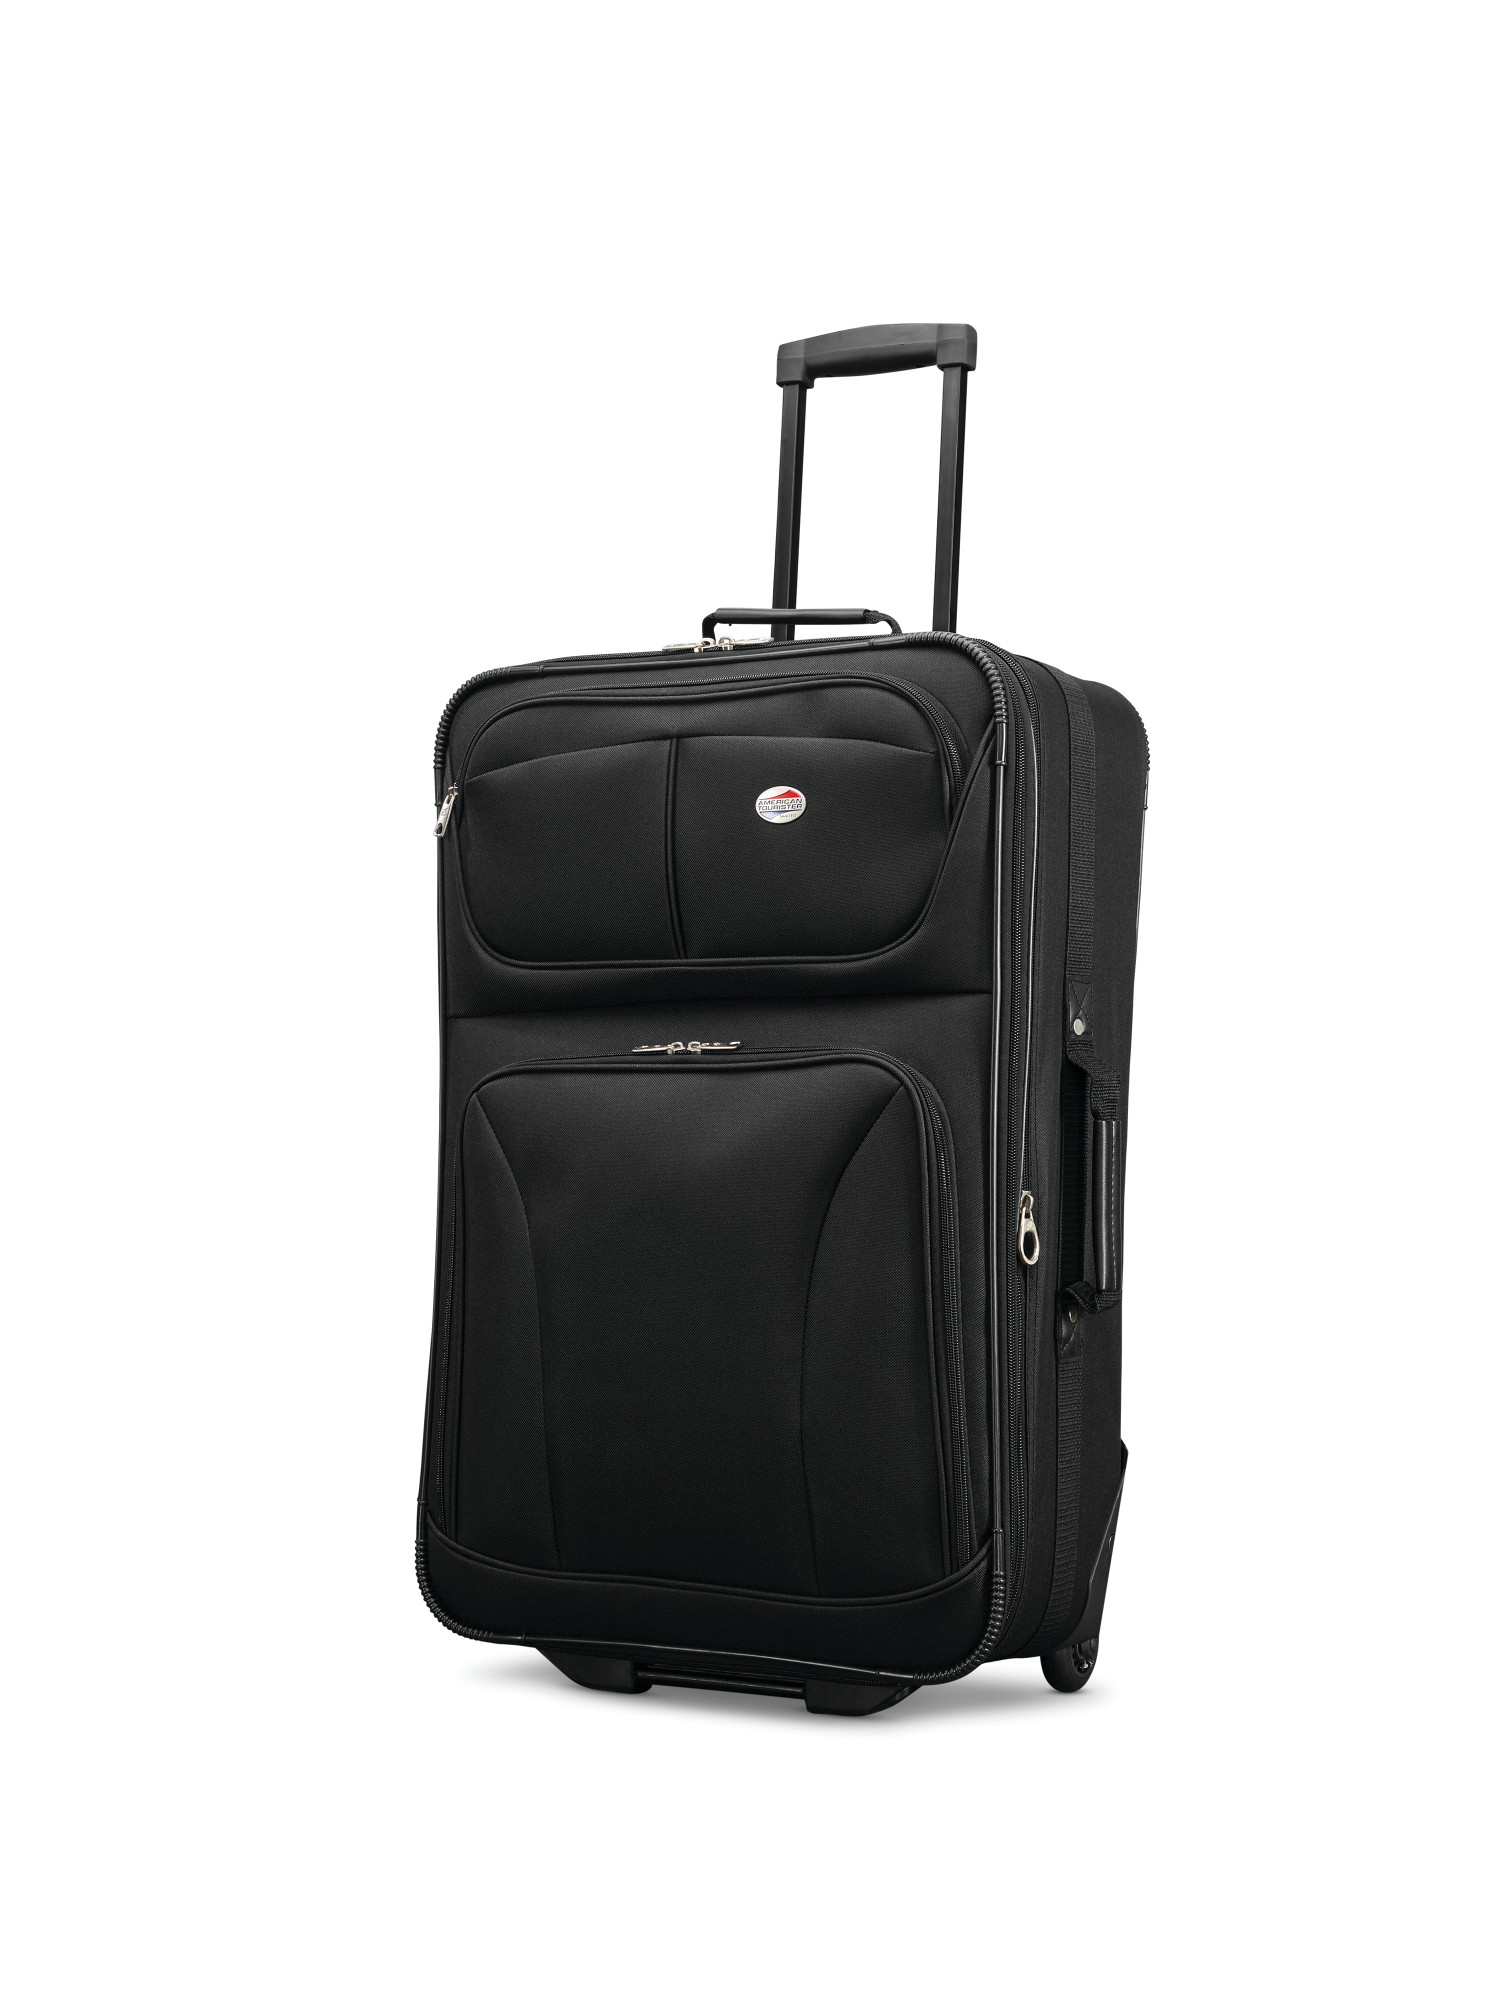 American Tourister Brewster 3 Piece Softside Luggage Set - image 2 of 9